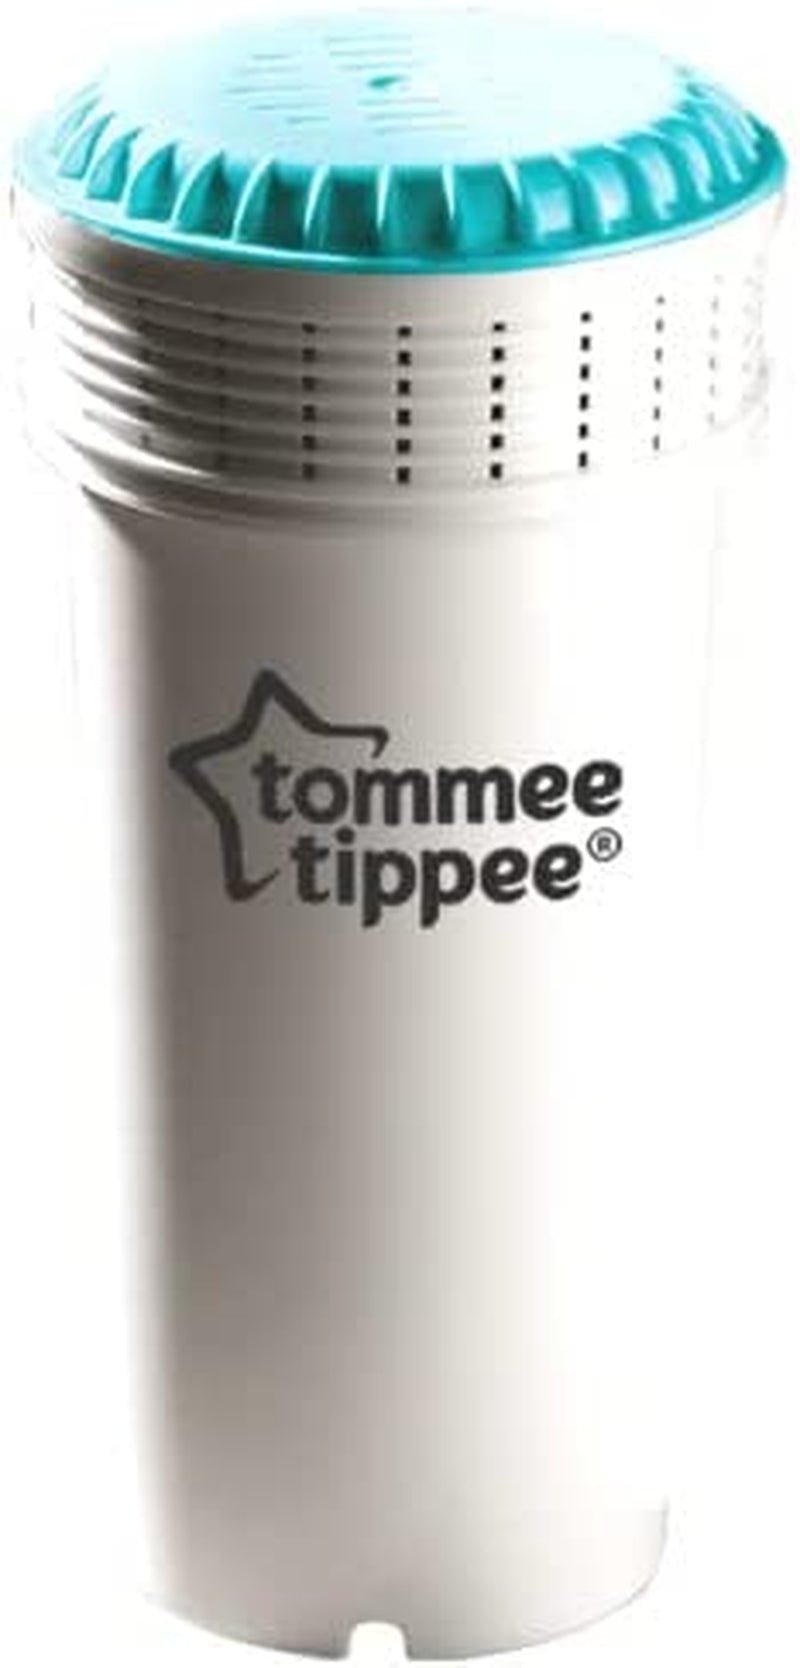 Tommee Tippee Replacement Filter for the Perfect Prep Baby Bottle Maker  Machines, Pack of 1